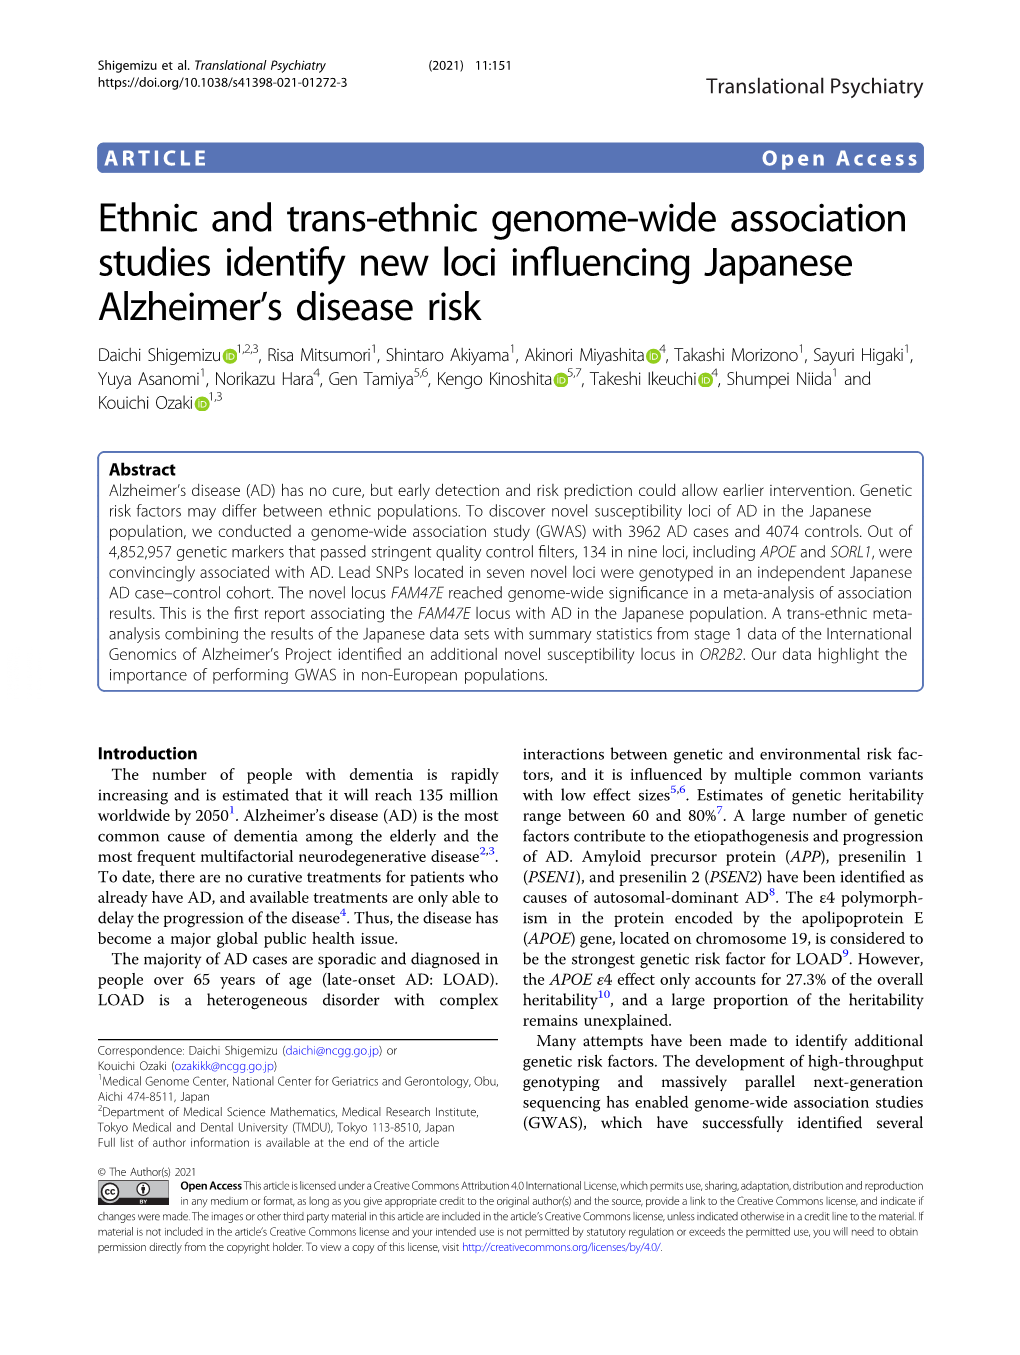 Ethnic and Trans-Ethnic Genome-Wide Association Studies Identify New Loci Influencing Japanese Alzheimer's Disease Risk